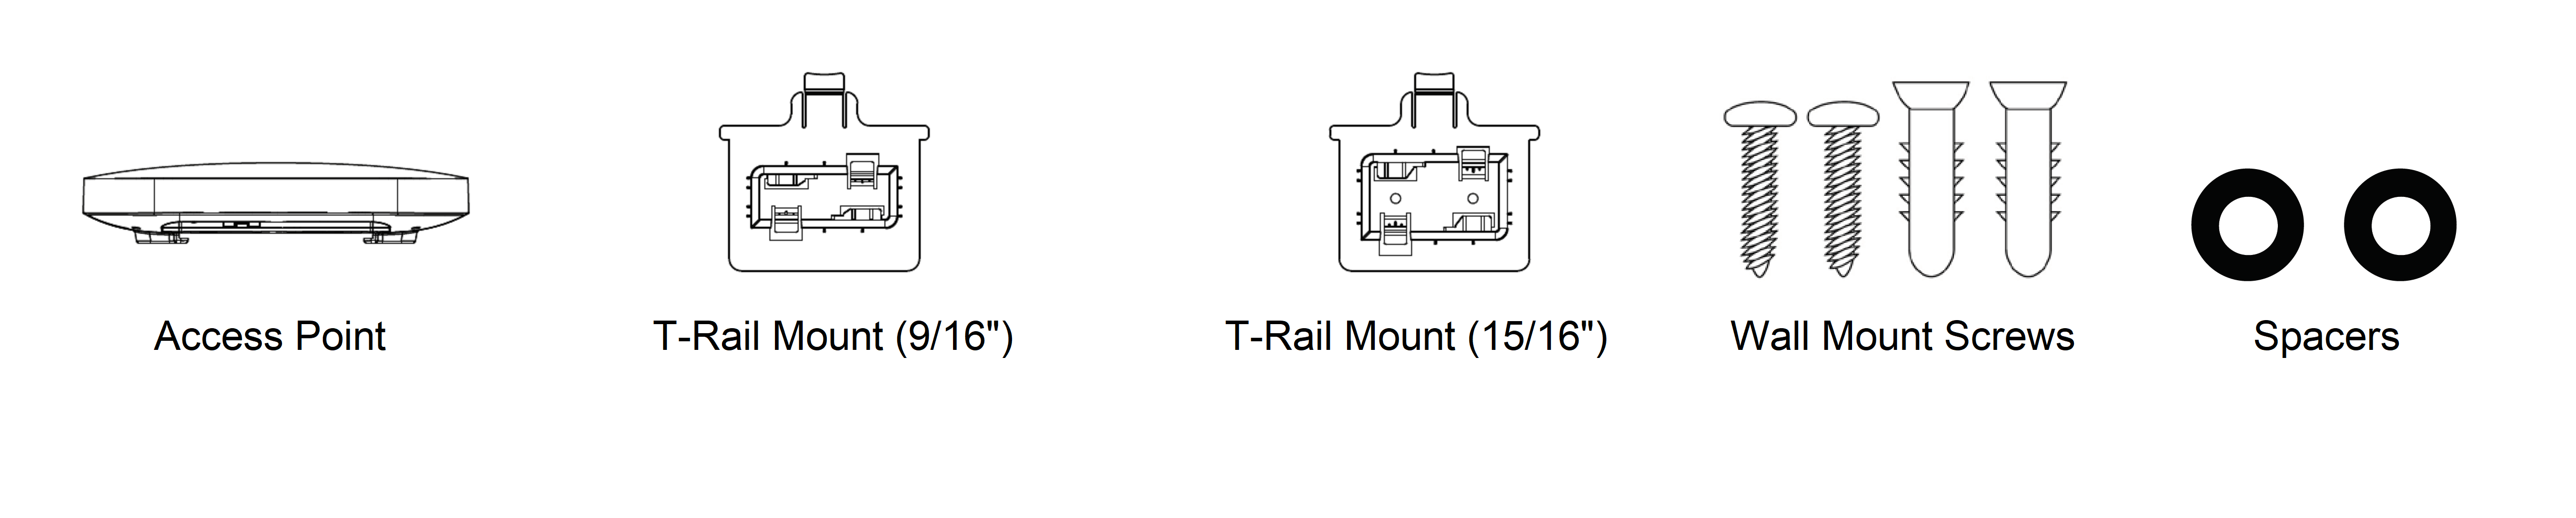 Diagram of the AP432 mounting parts list